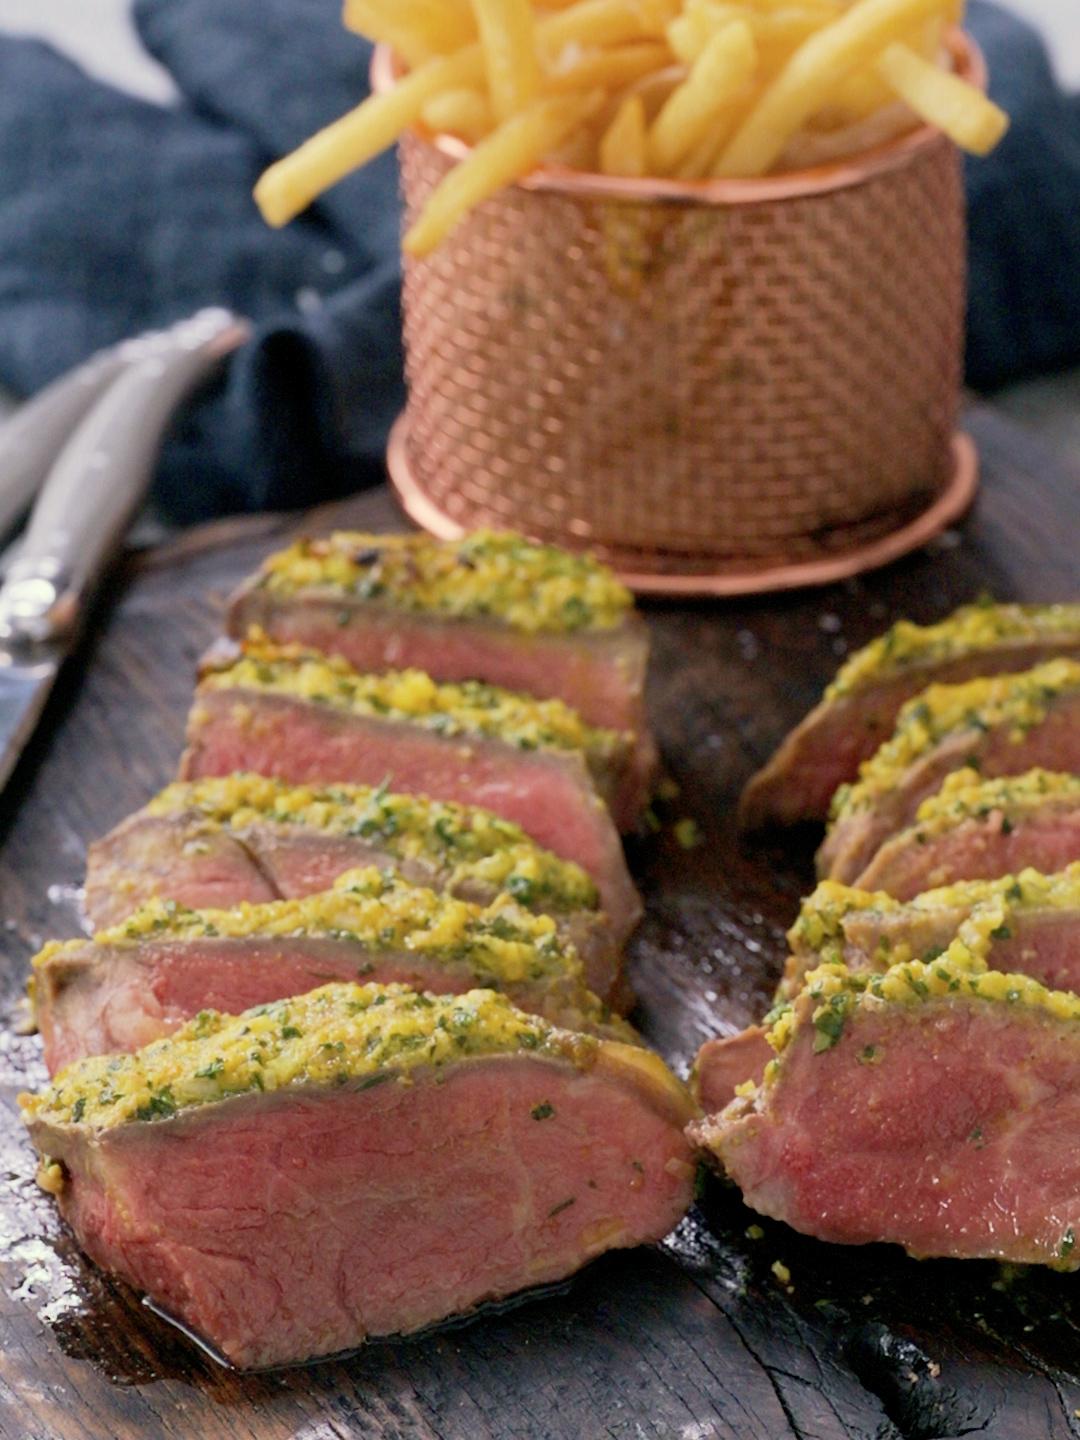 Grilled Steak with Garlic Parsley Butter